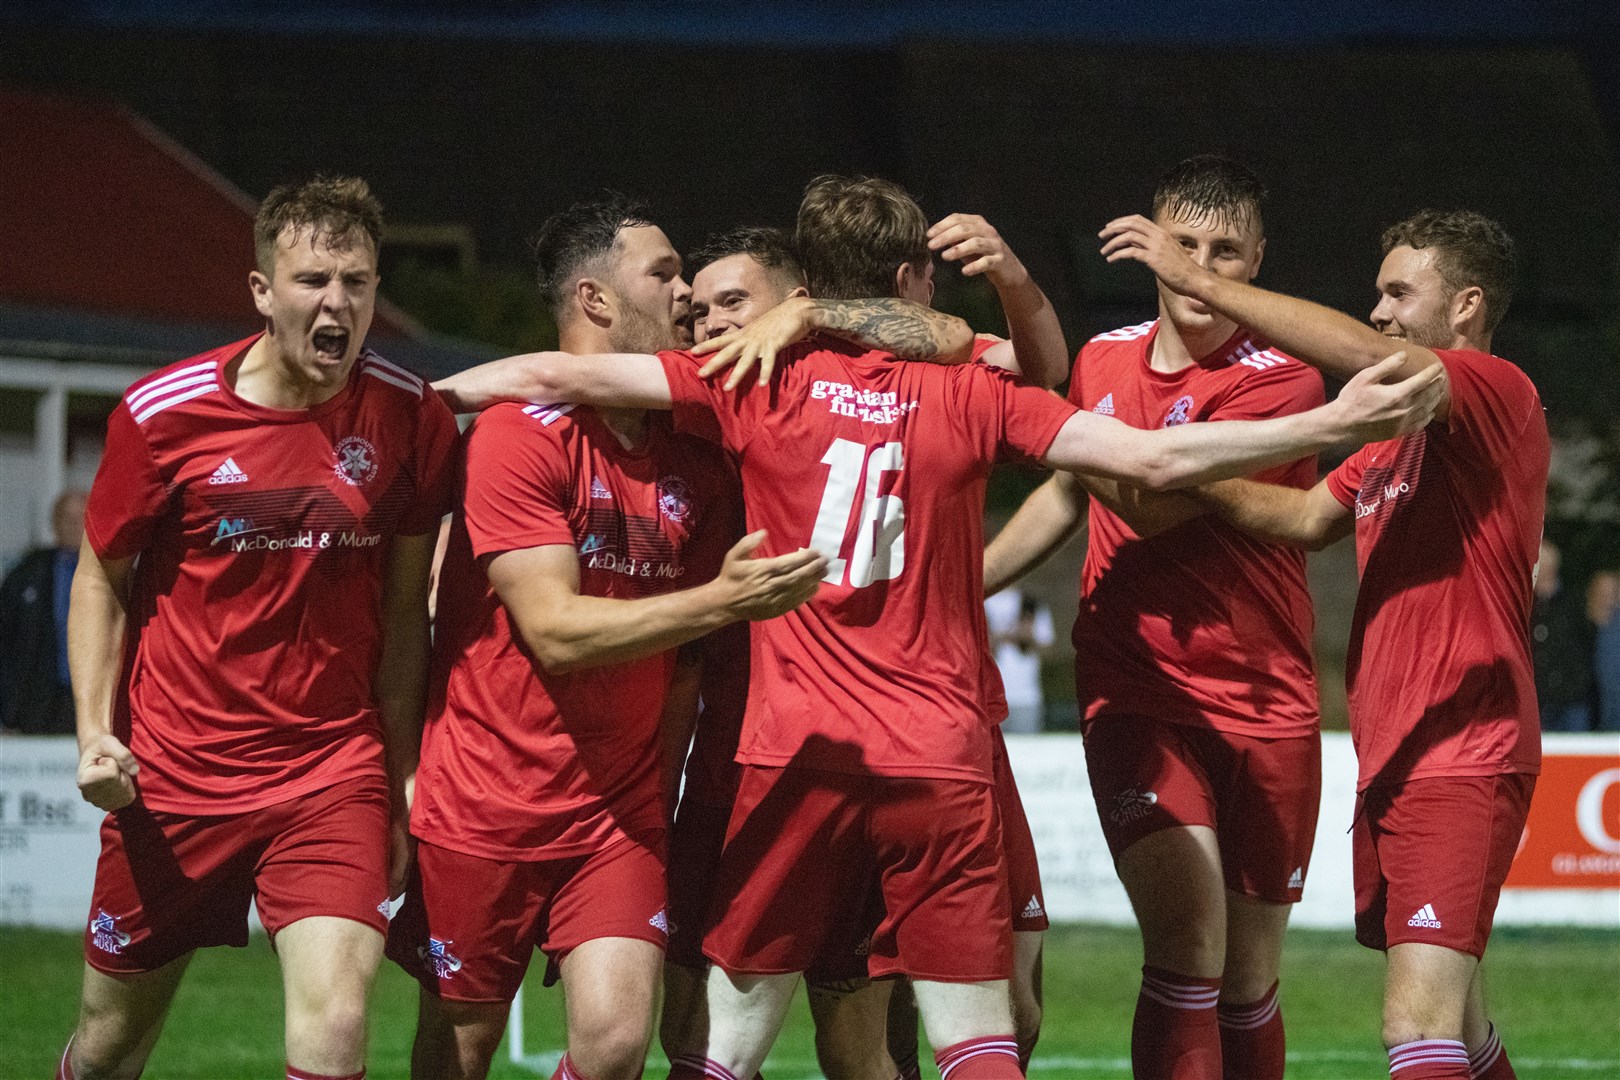 Lossiemouth celebrate Baylee Campbell's goal...Lossiemouth FC (4) vs Strathspey Thistle (2) - Highland Football League 22/23 - Grant Park, Lossiemouth 24/08/2022...Picture: Daniel Forsyth..